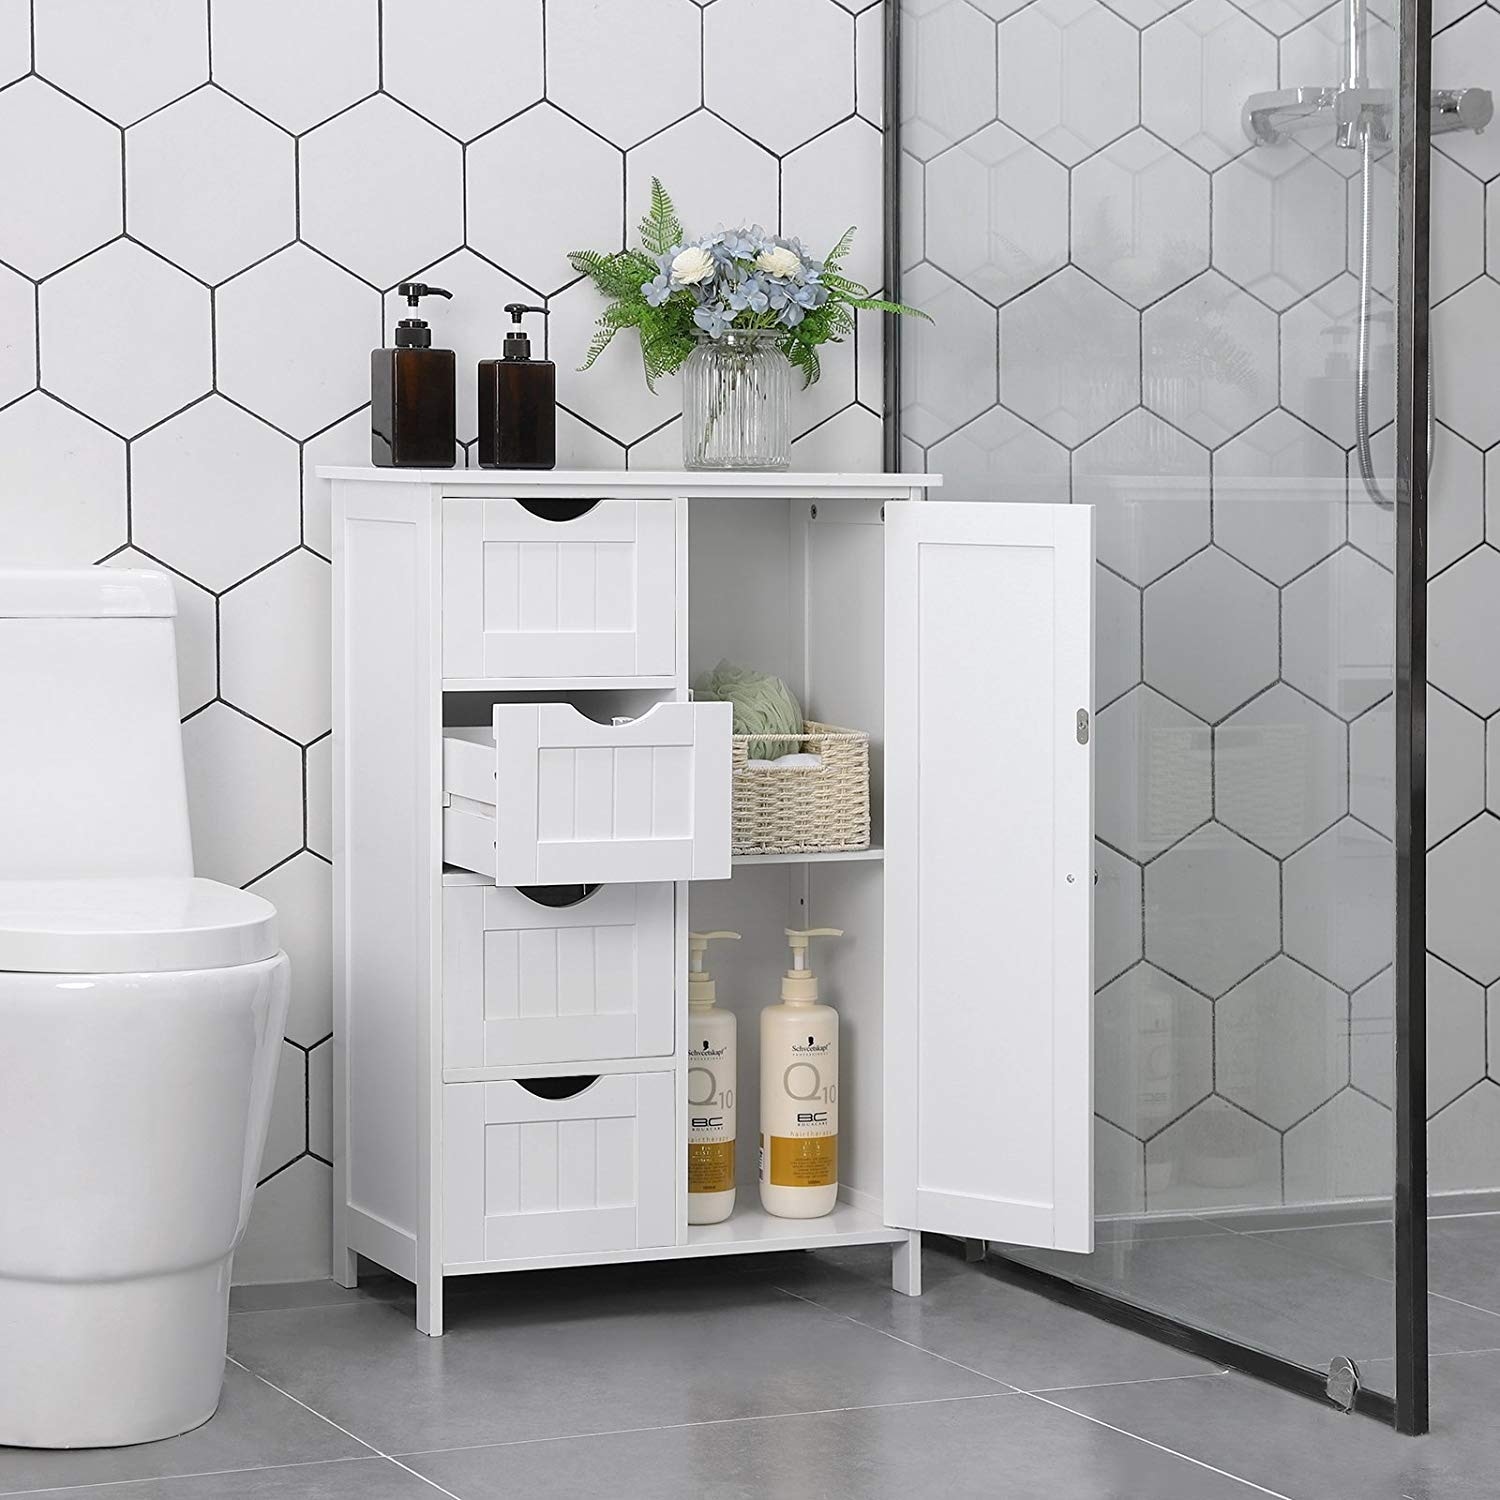 https://ak1.ostkcdn.com/images/products/is/images/direct/28babe796eb17759c0fccfd41c81529e8d54f6af/TiramisuBest-Bathroom-Storage-Cabinet-with-Adjustable-Shelf-and-Drawer.jpg